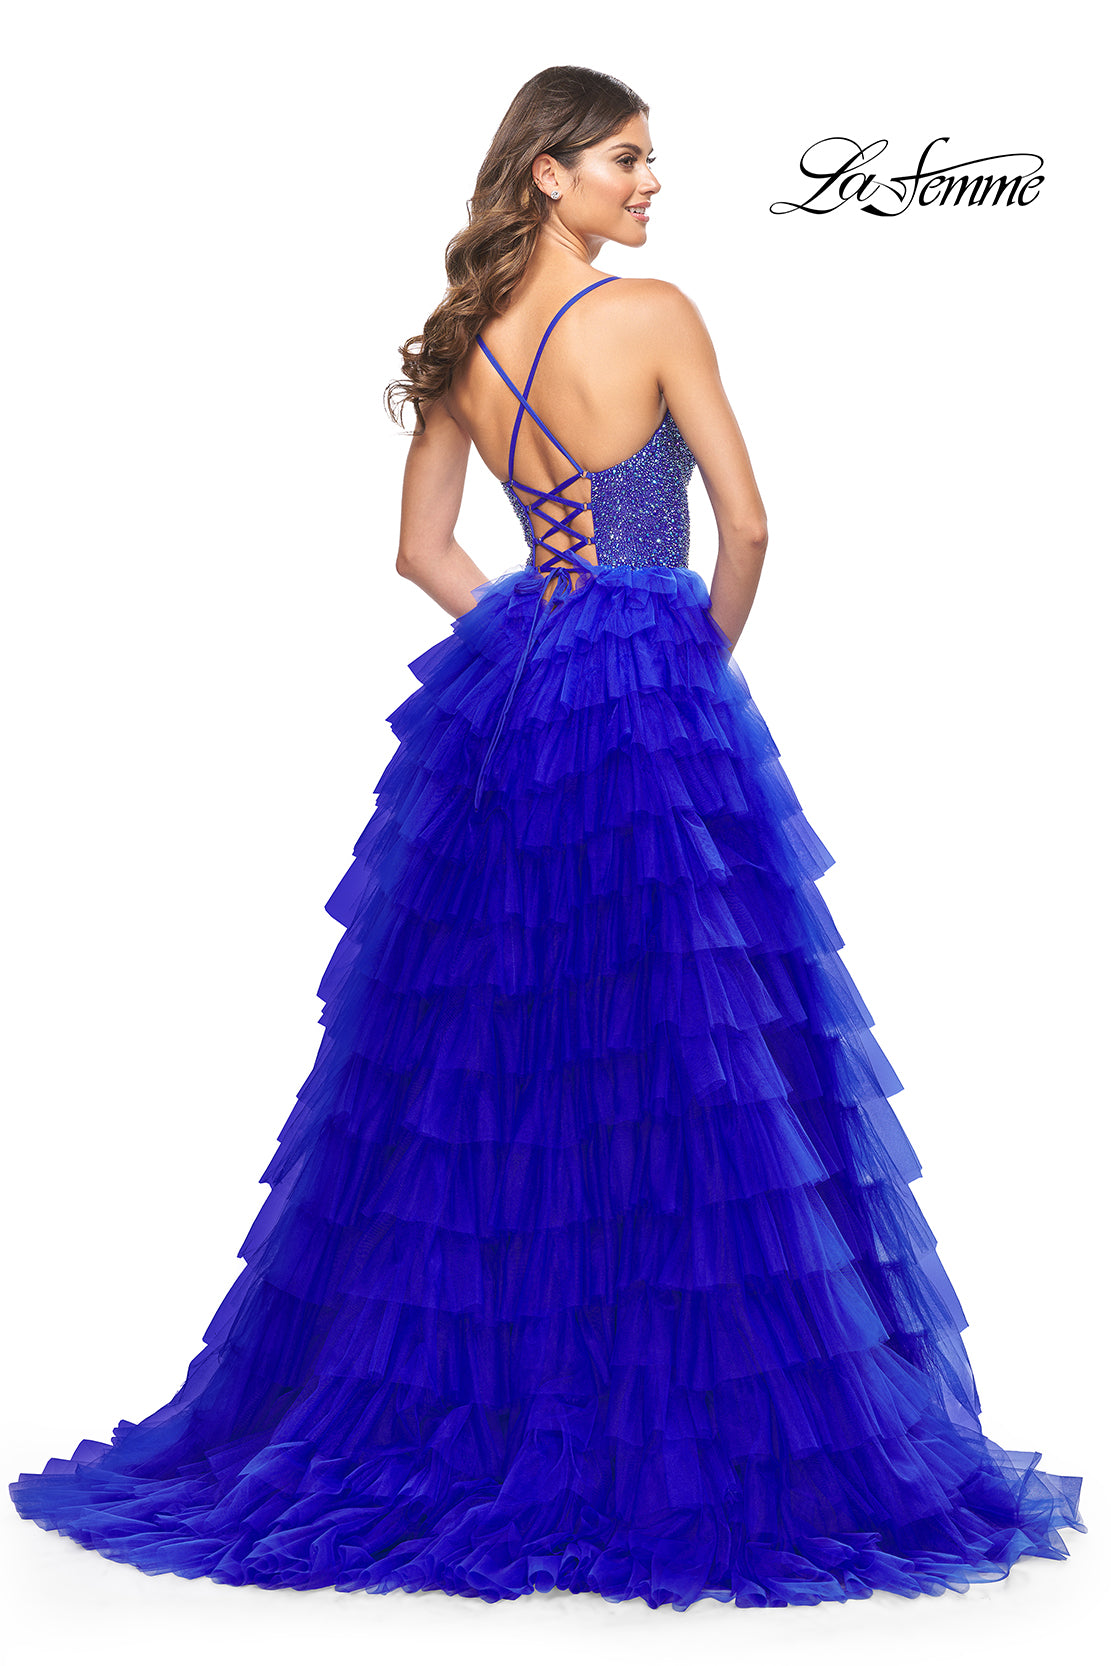 La-Femme-32002-Sweetheart-Neckline-Lace-up-Back-High-Slit-Hot-Stone-Tulle-Ball-Gowns-Royal-Blue-Evening-Dress-B-Chic-Fashions-Prom-Dress